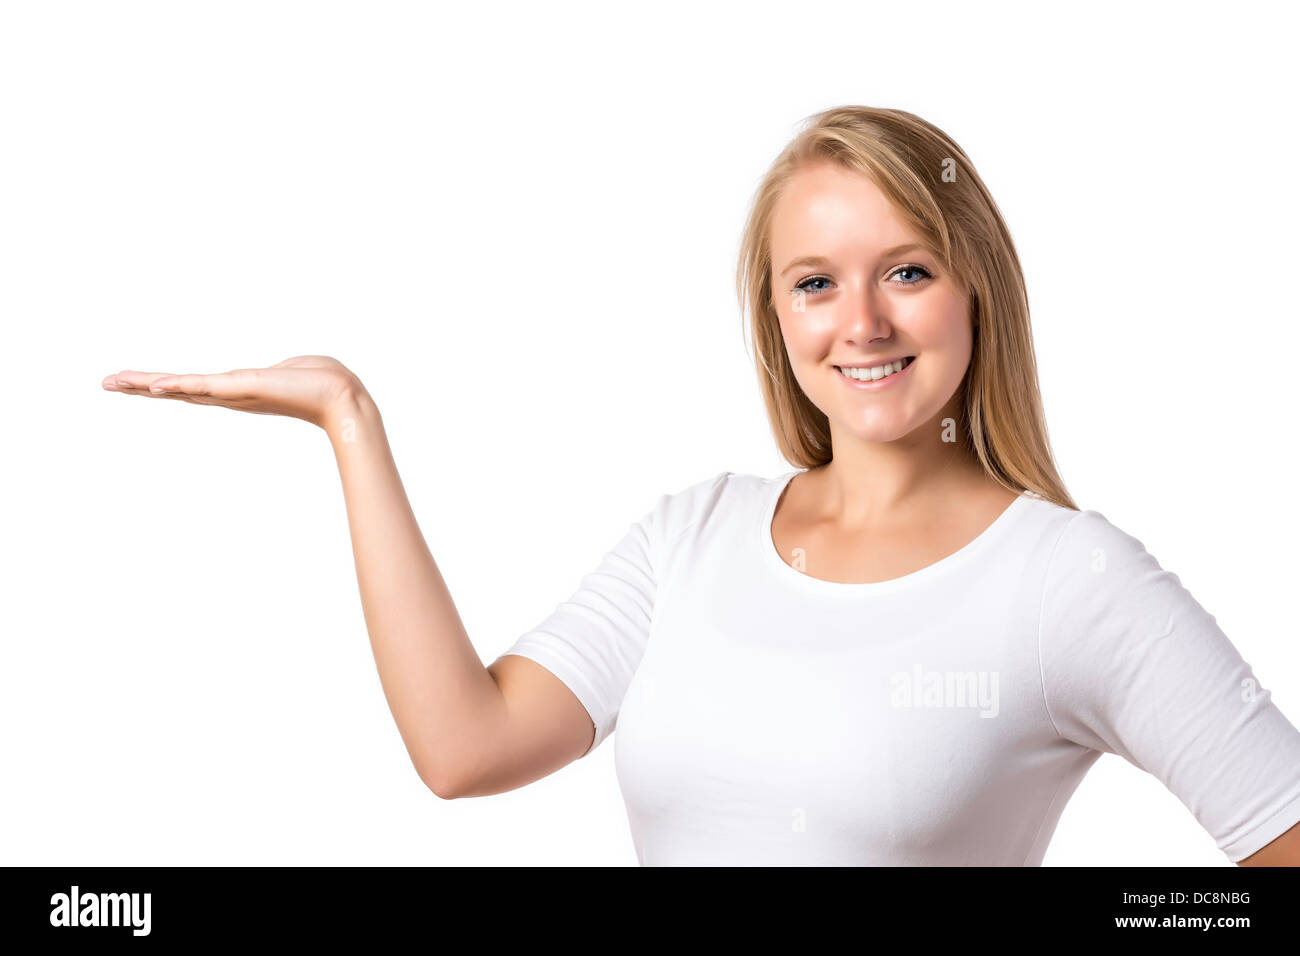 Laughing blond woman with blue eyes holding the palm of the right hand up, isolated on white background Stock Photo